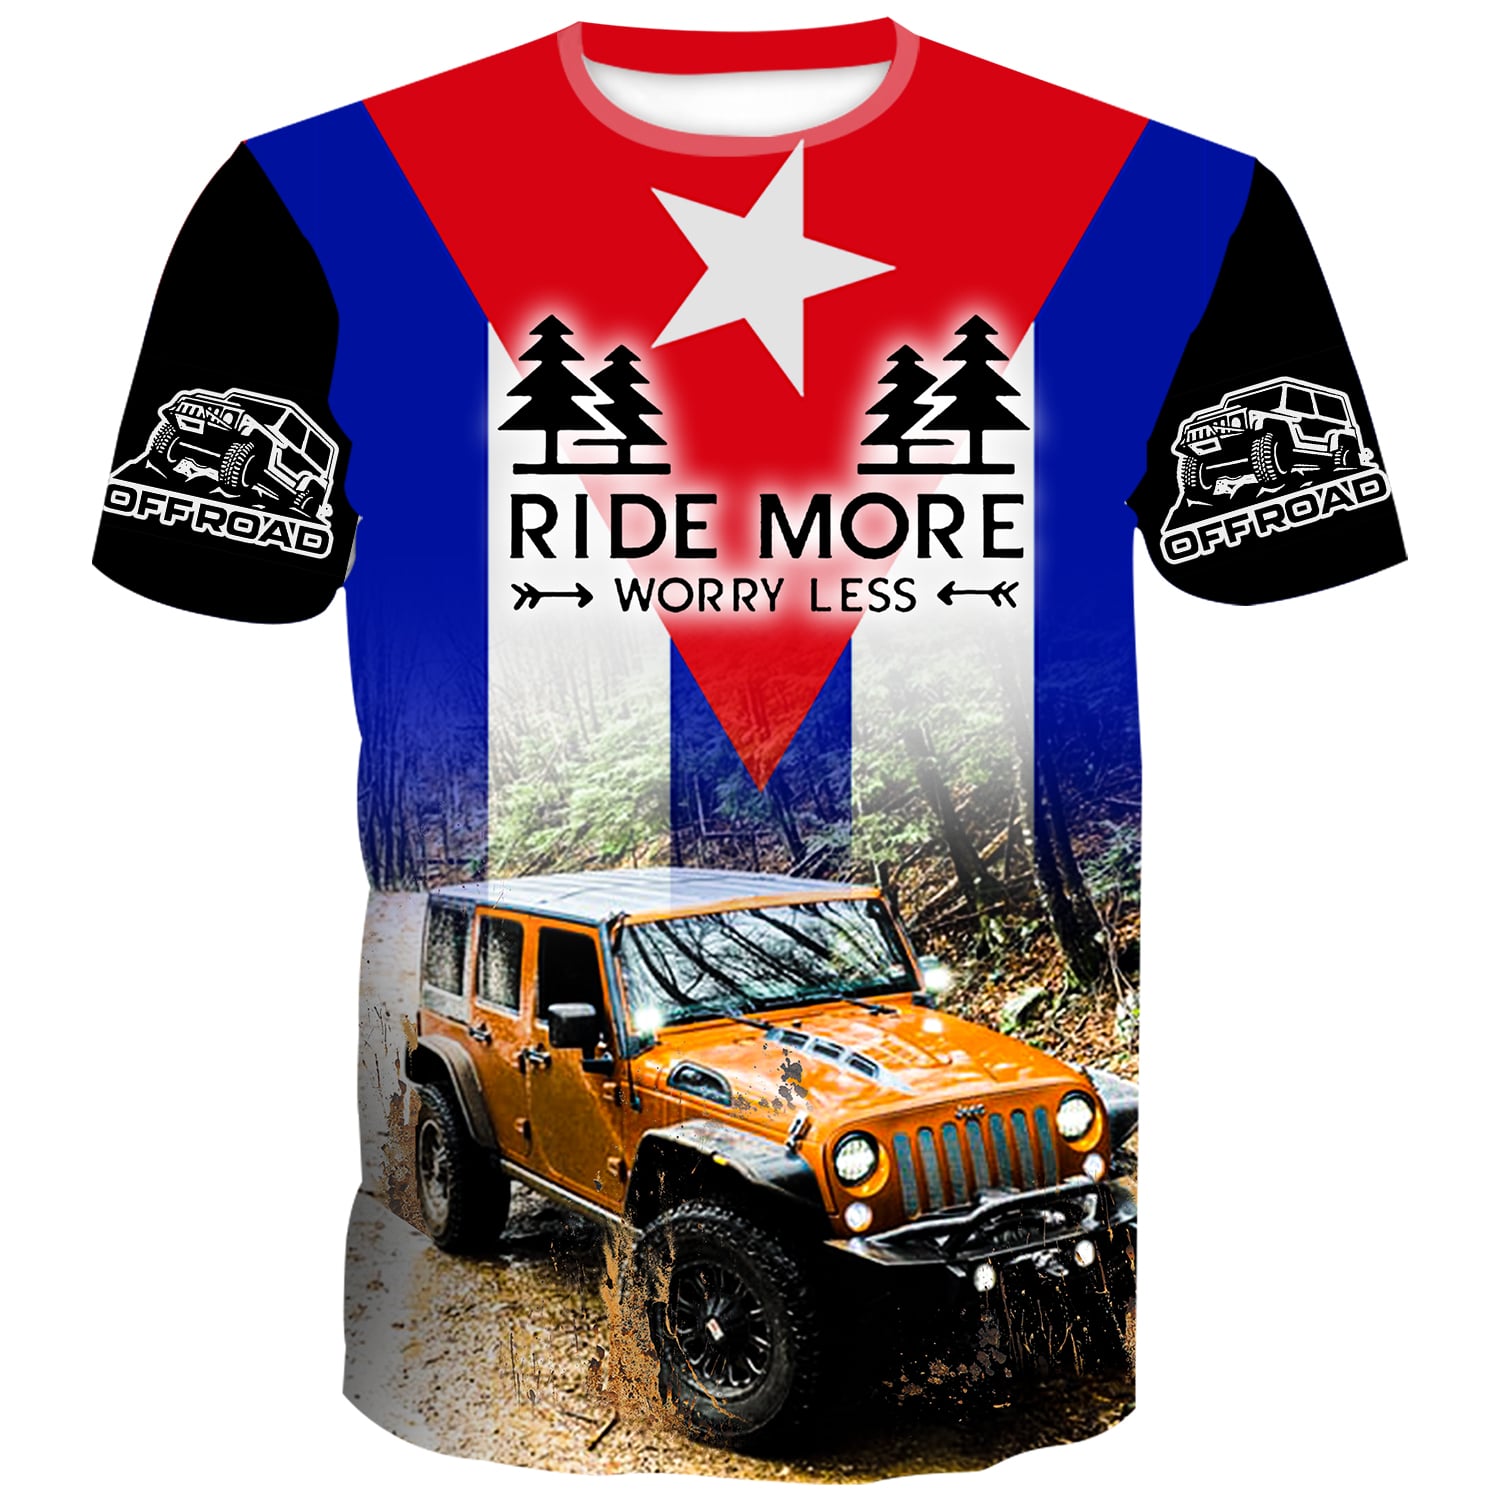 Ride more worry less - Cuban Flag